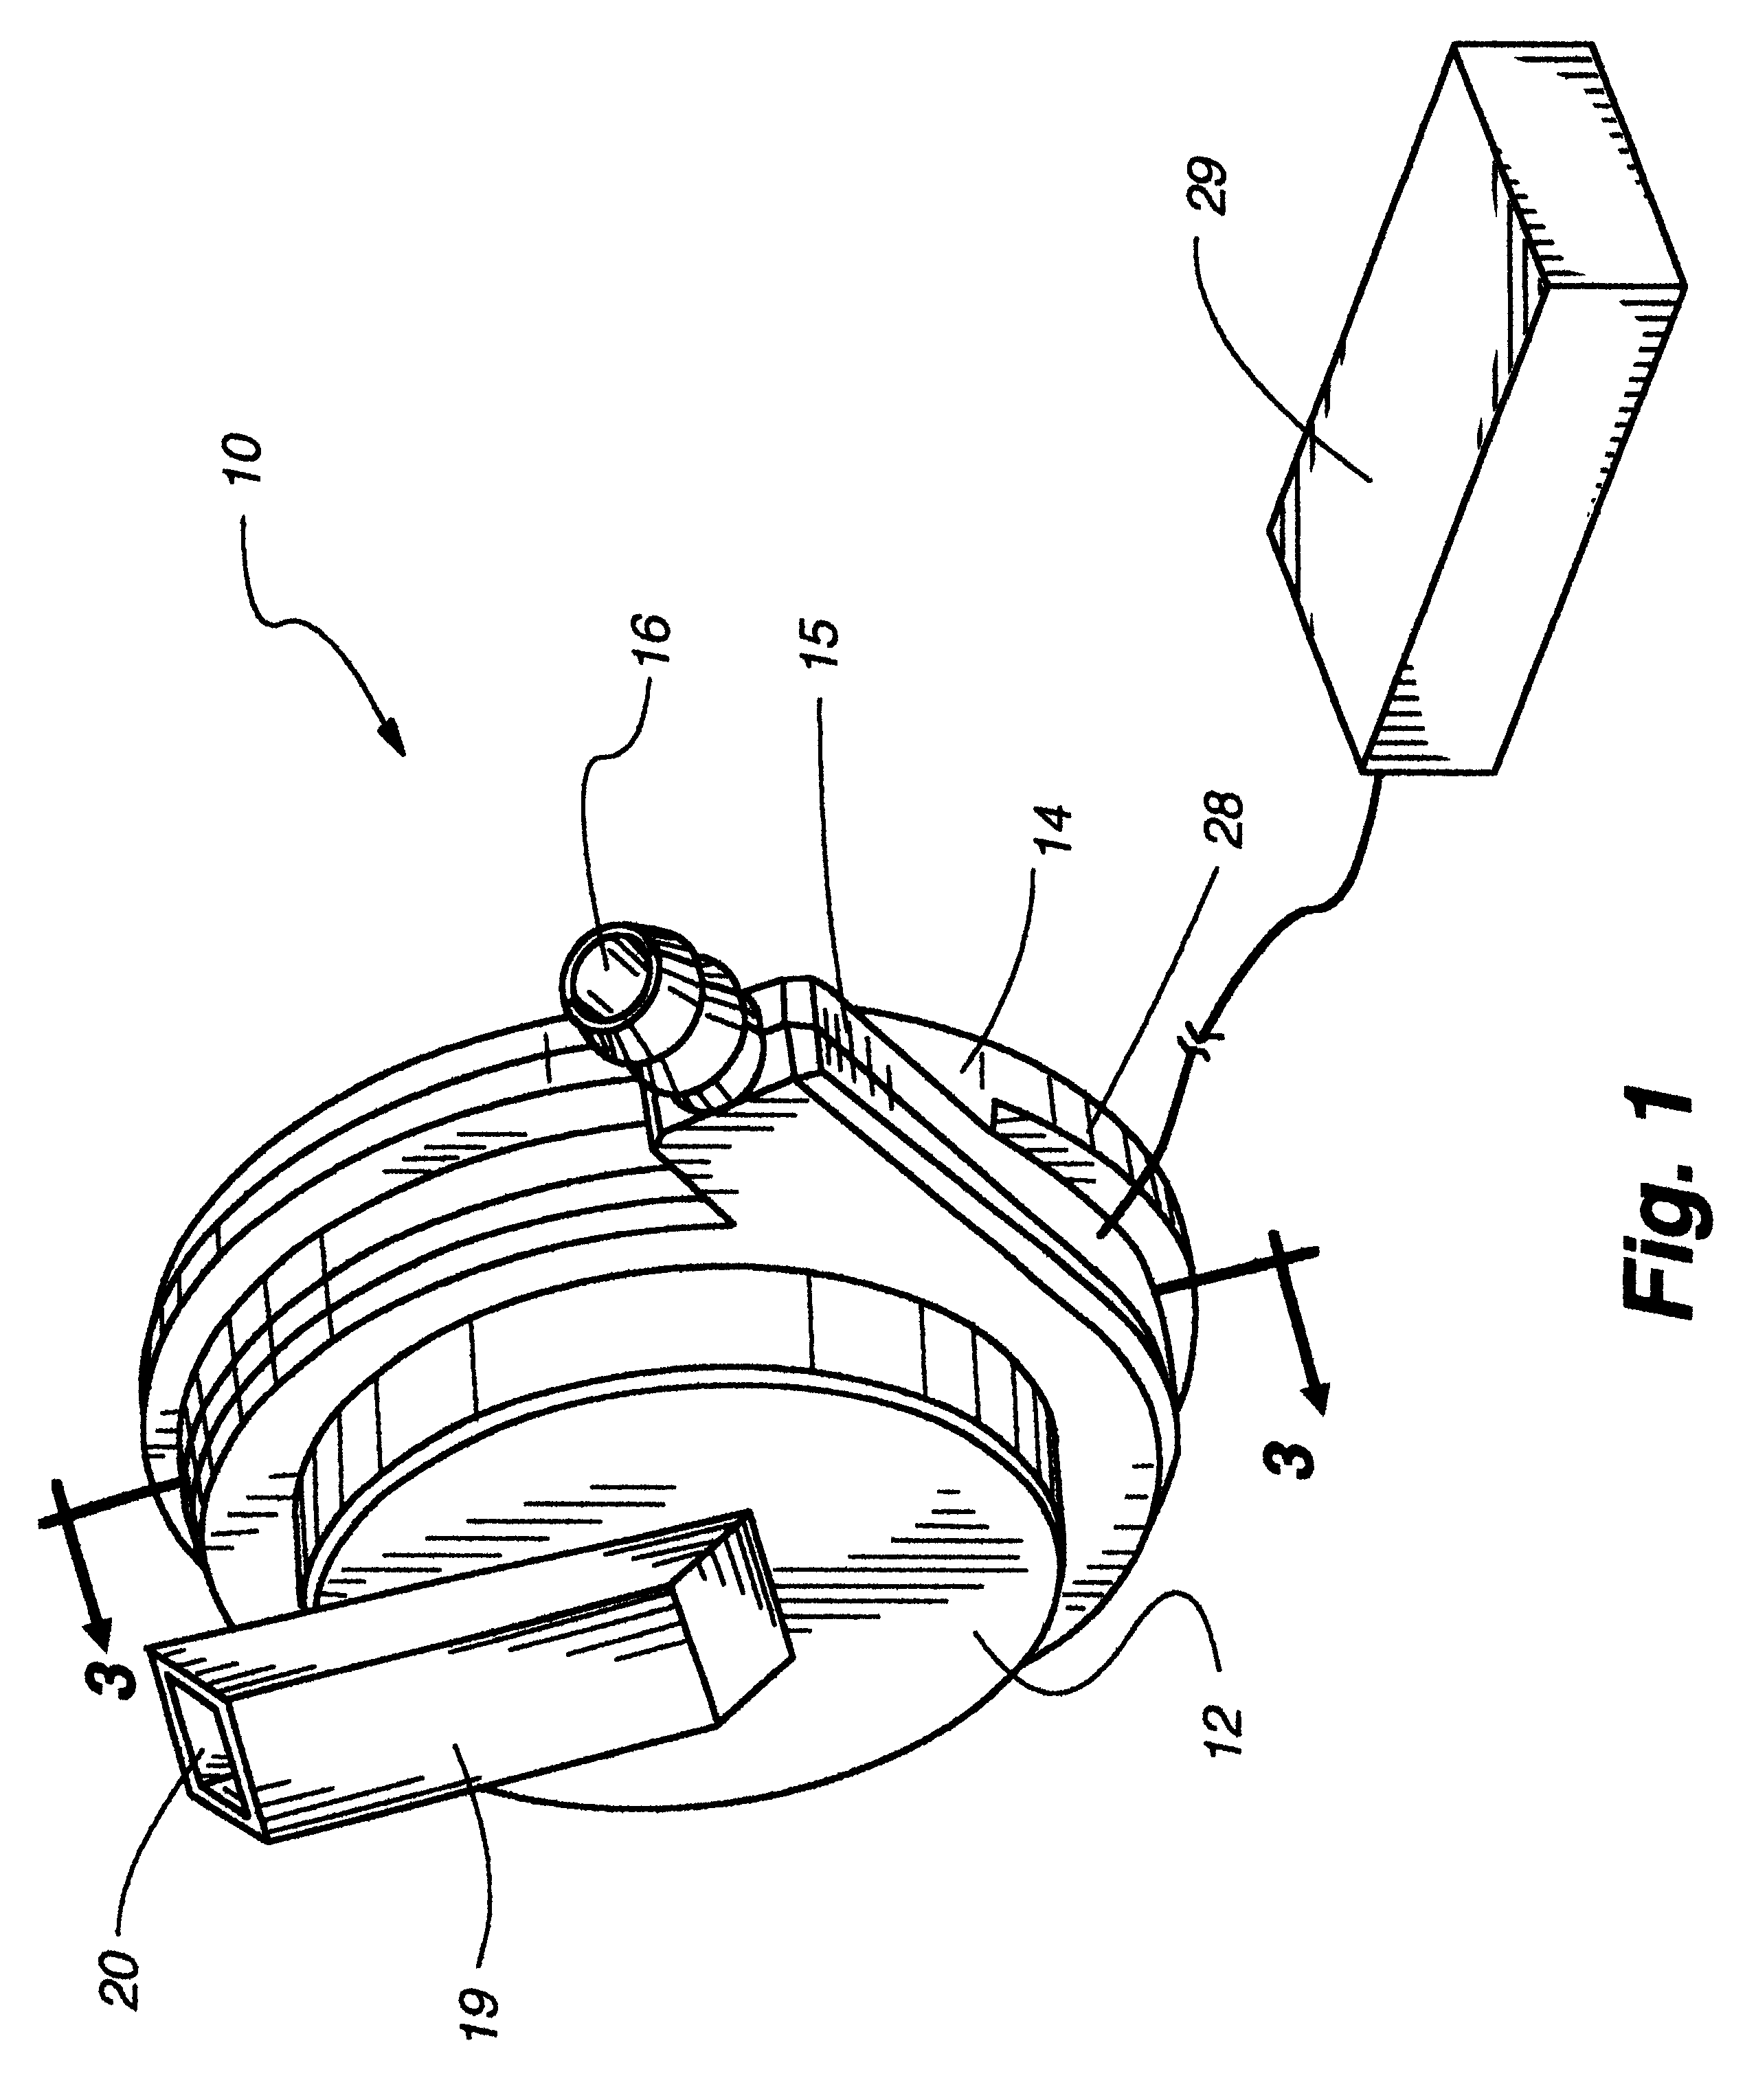 Electromagnetically suspended and rotated centrifugal pumping apparatus and method